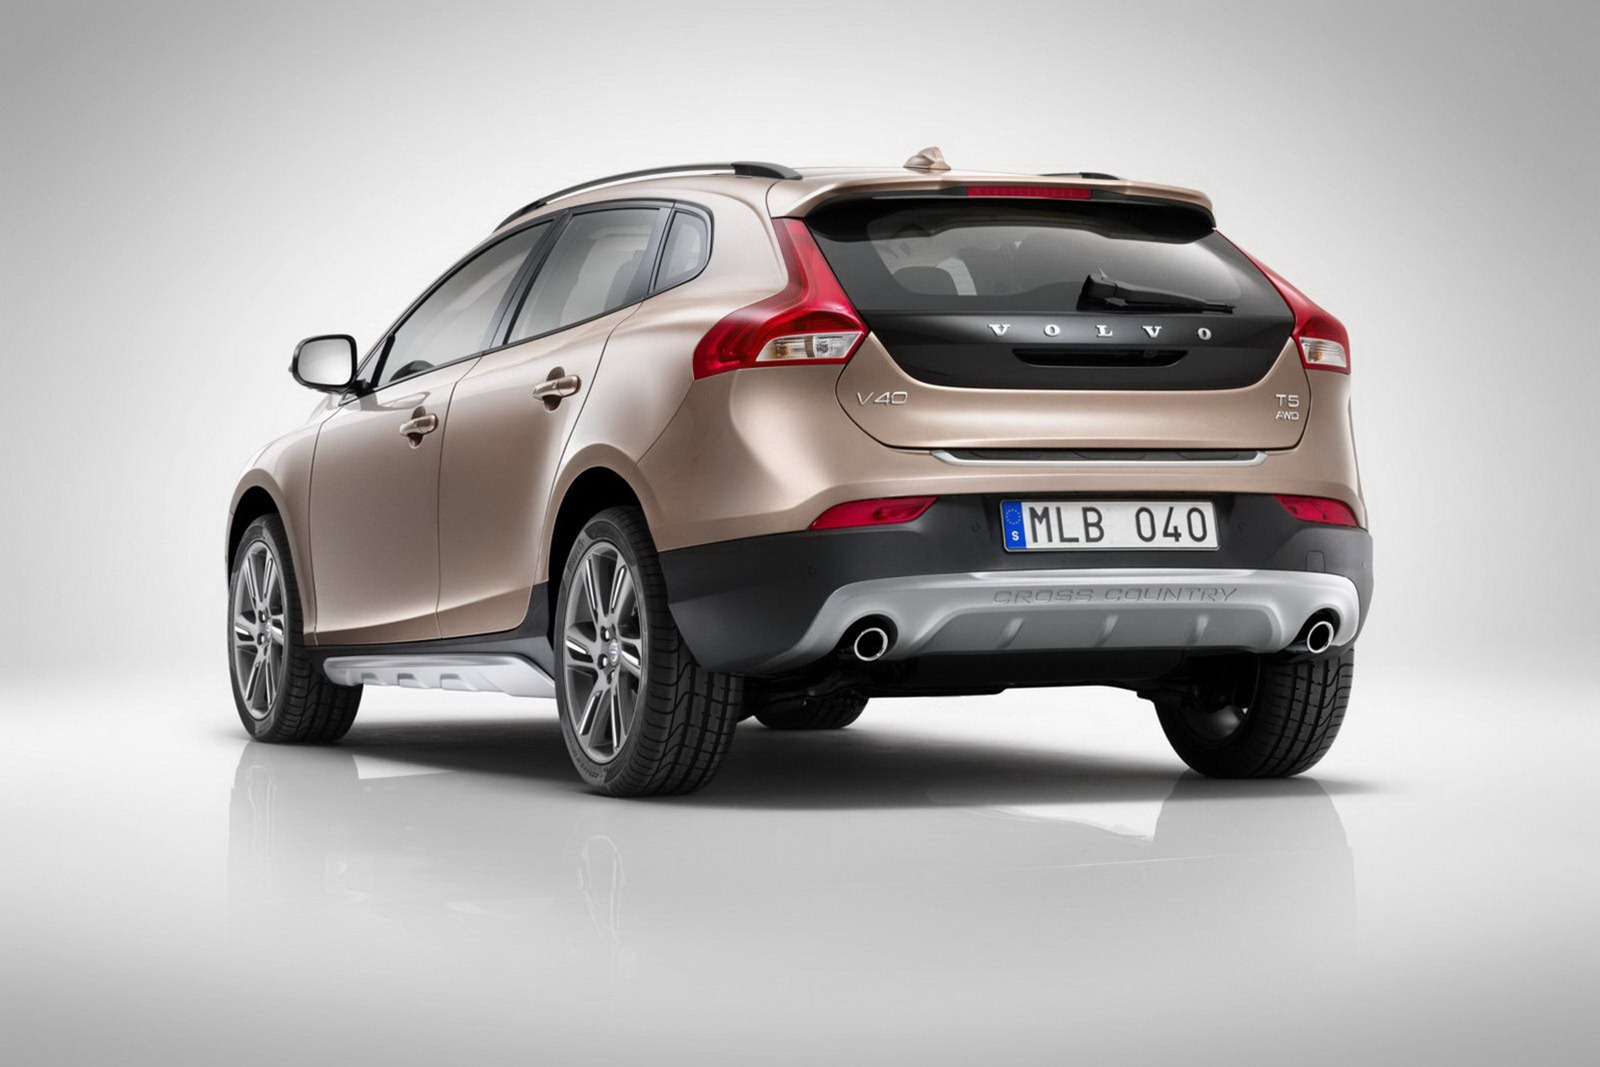 Next Volvo V40 could become a coupe-like crossover